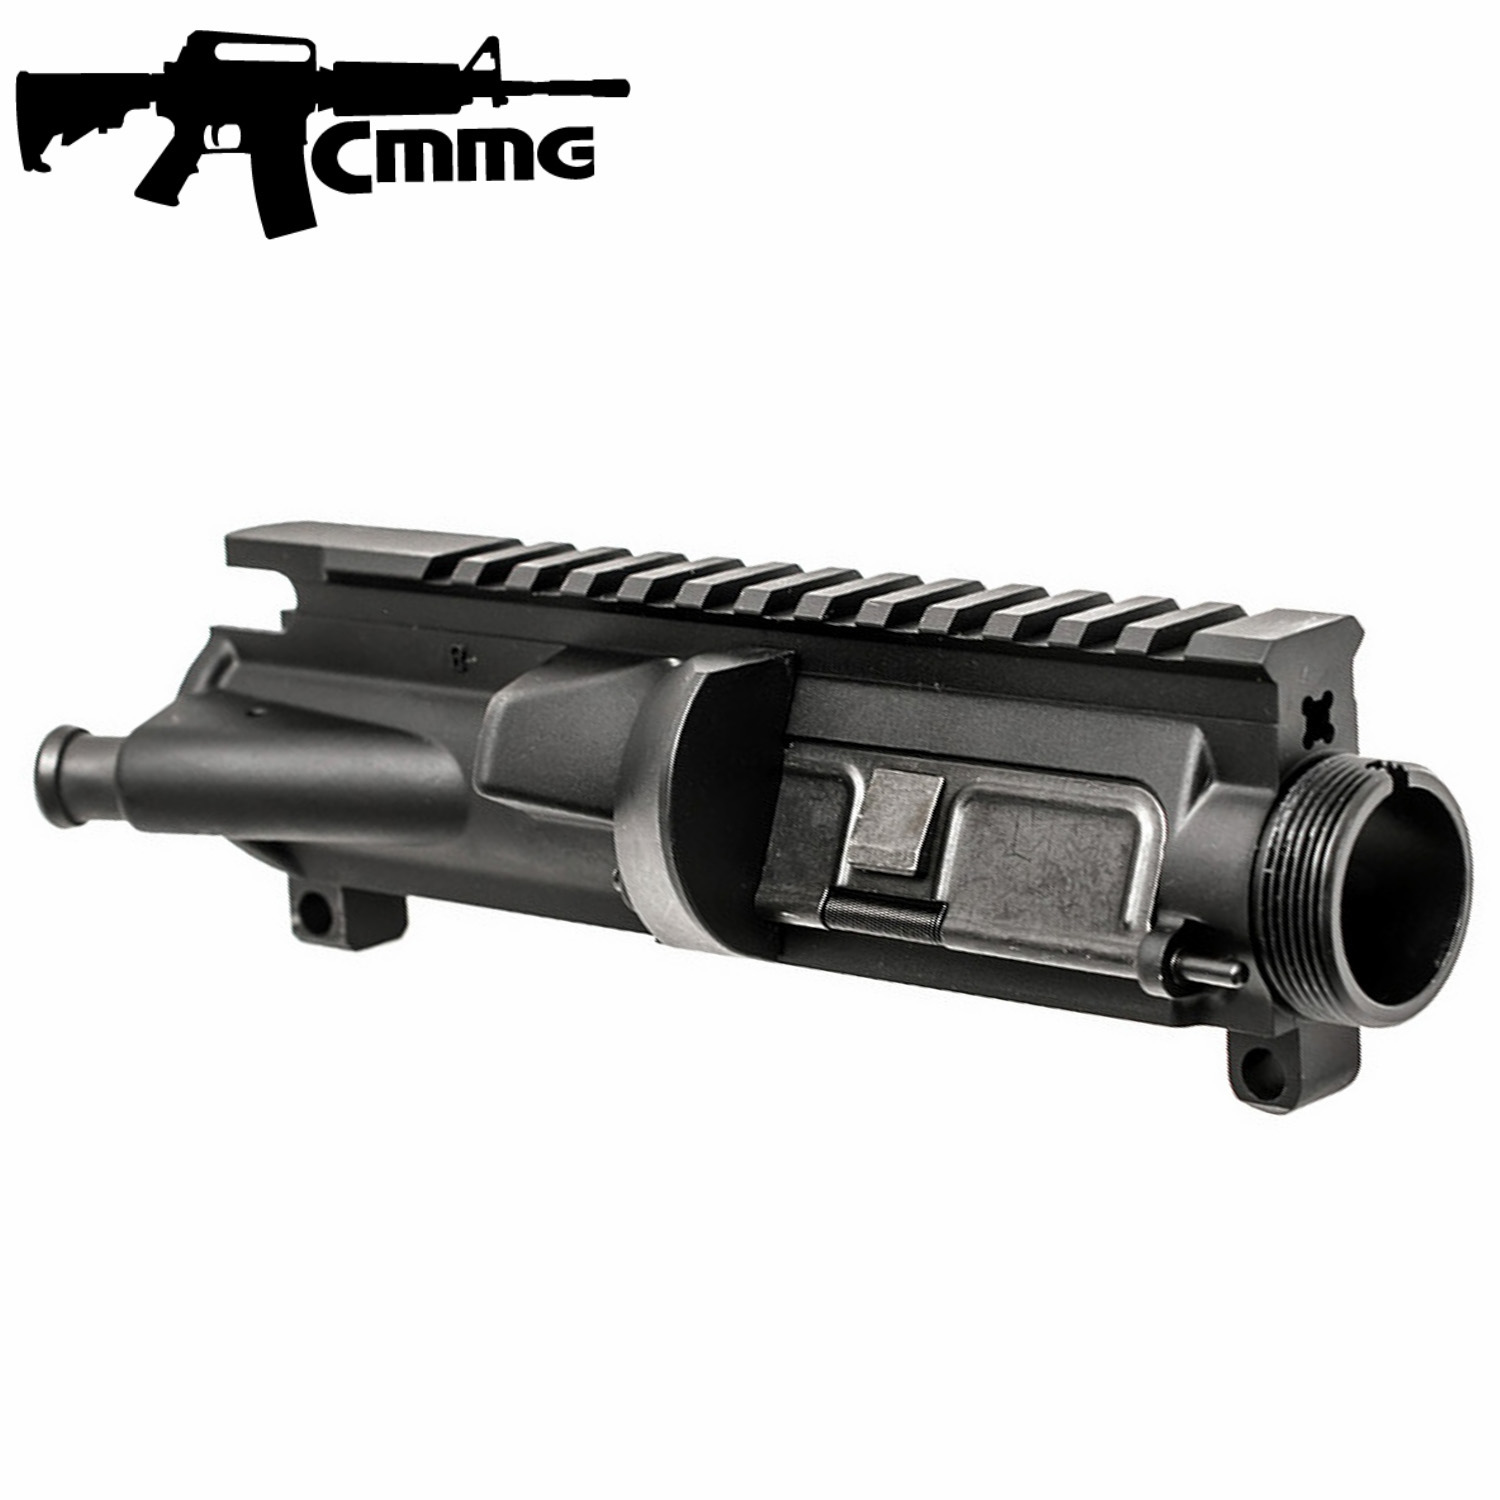 Related image of 22 Lr Upper Receiver.